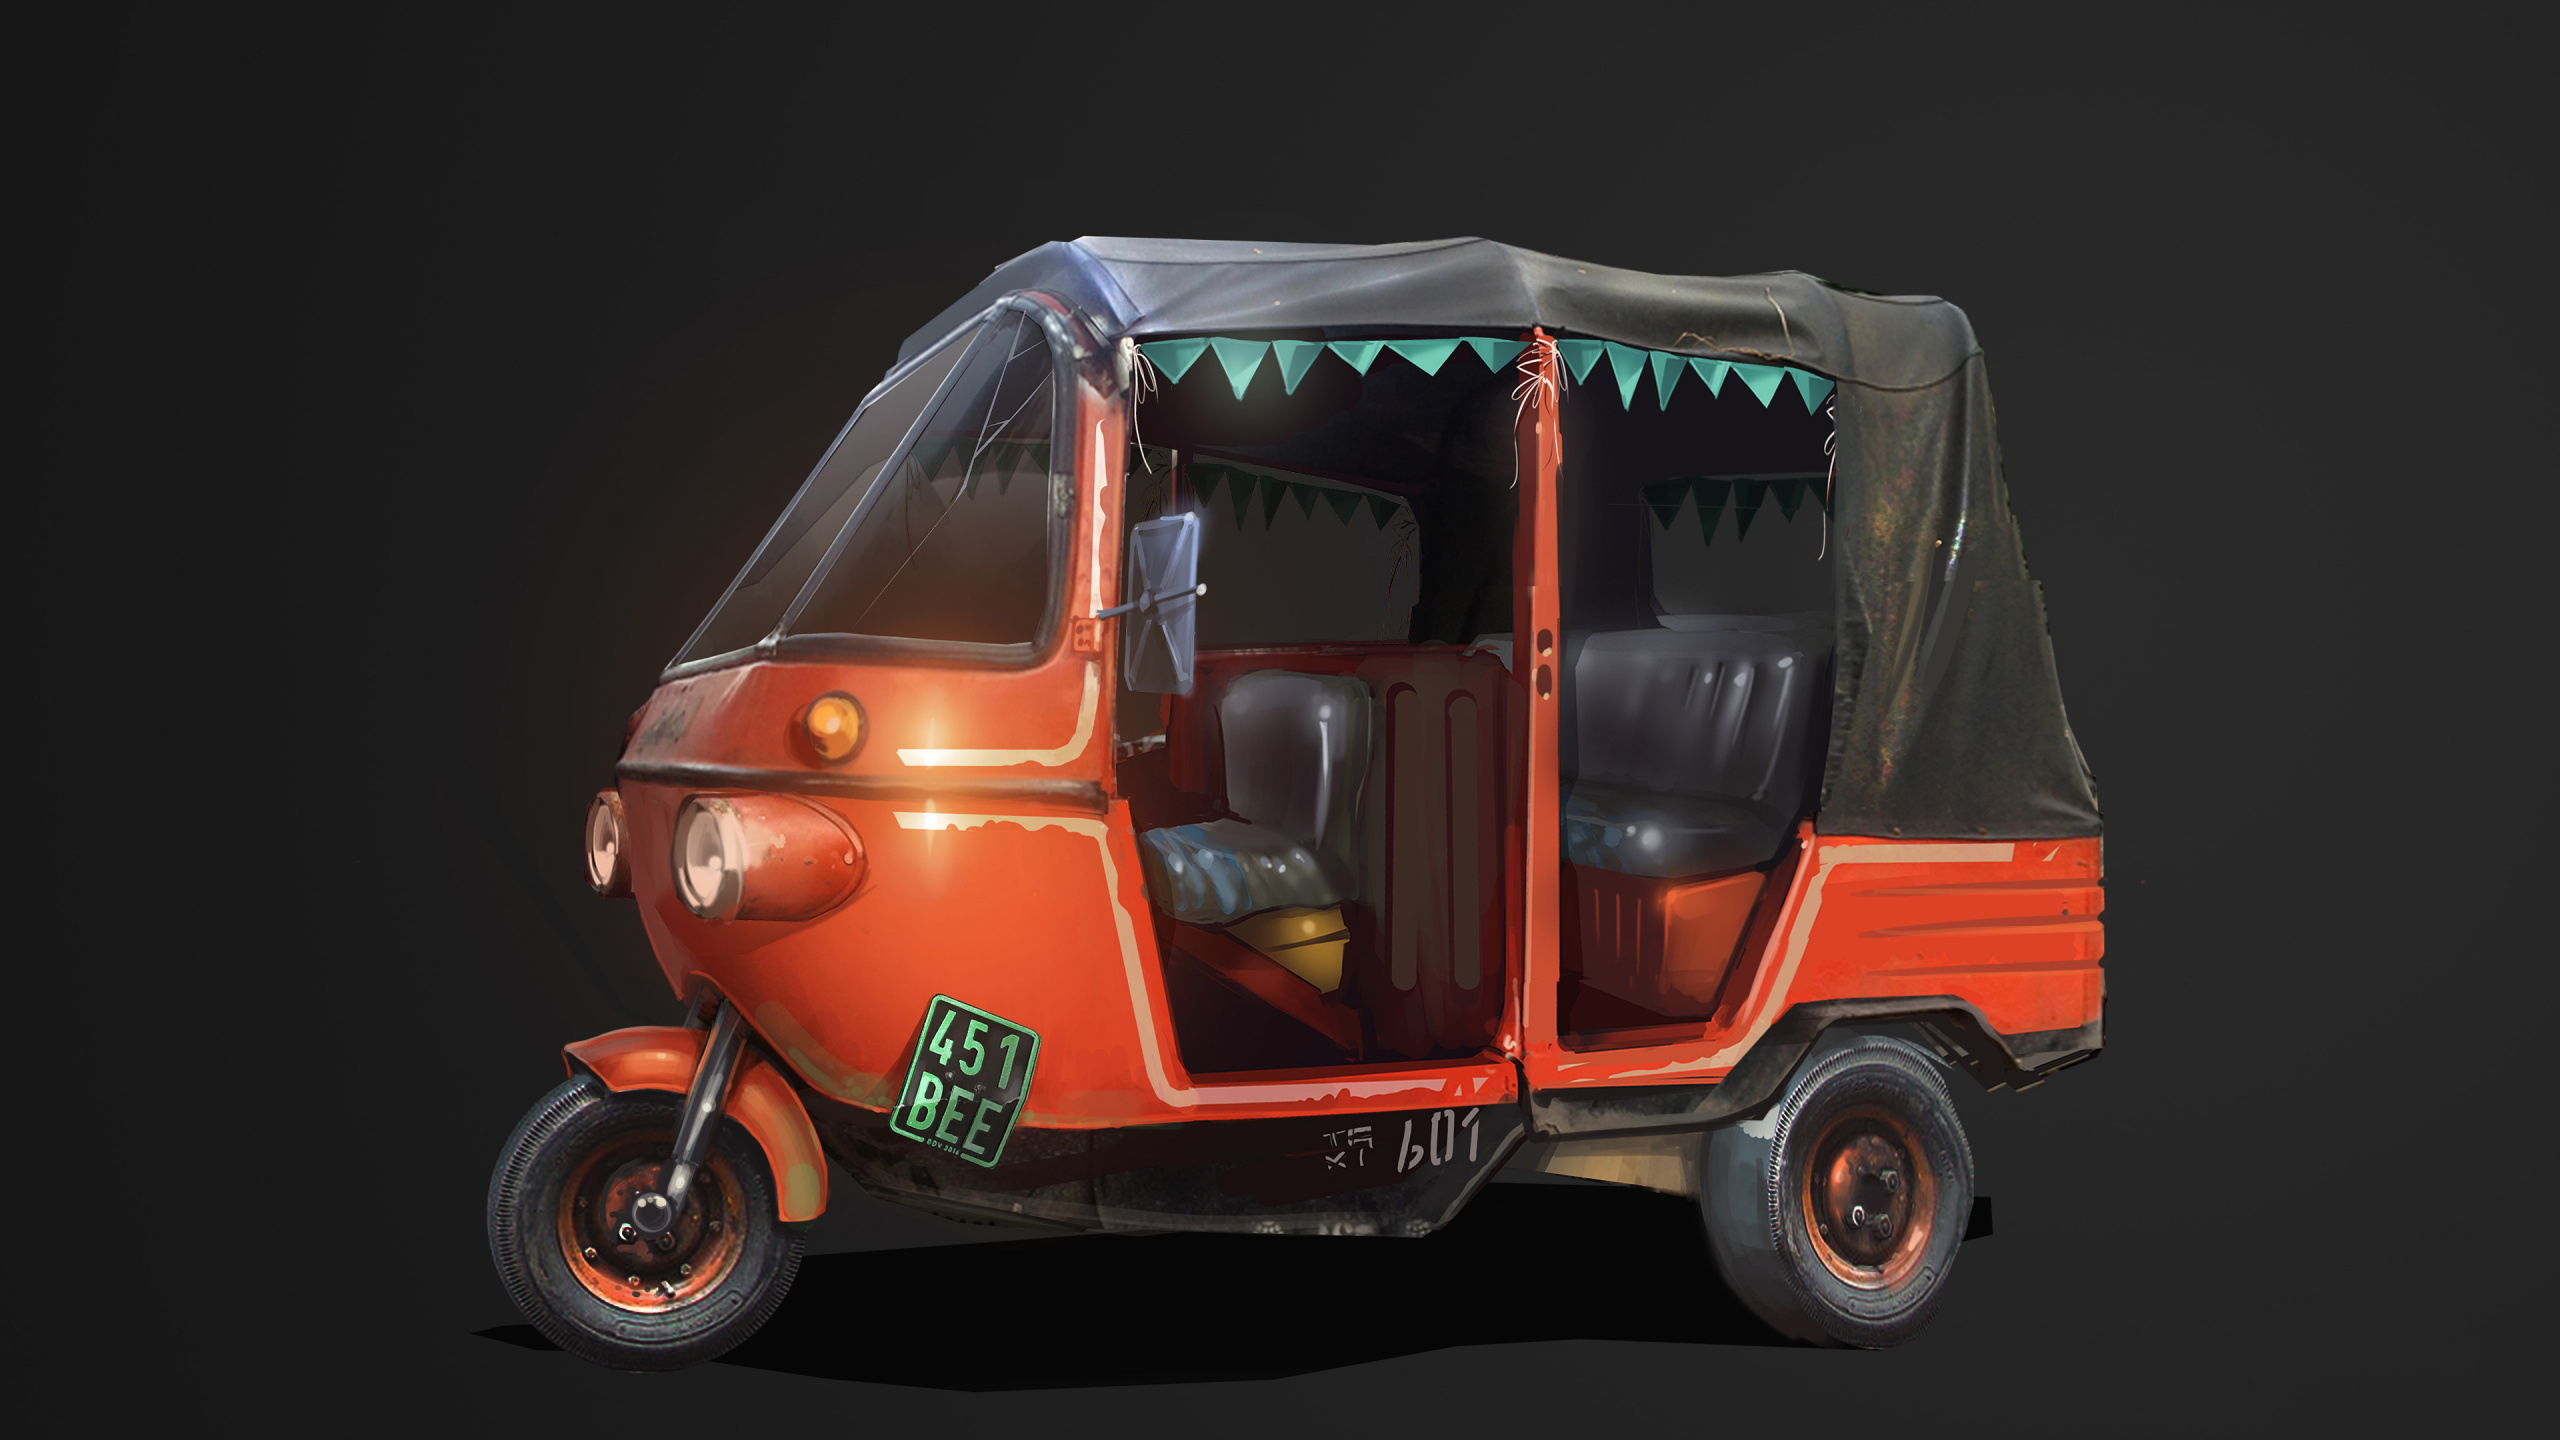 Red and Black Auto Rickshaw. Wallpaper in 2560x1440 Resolution